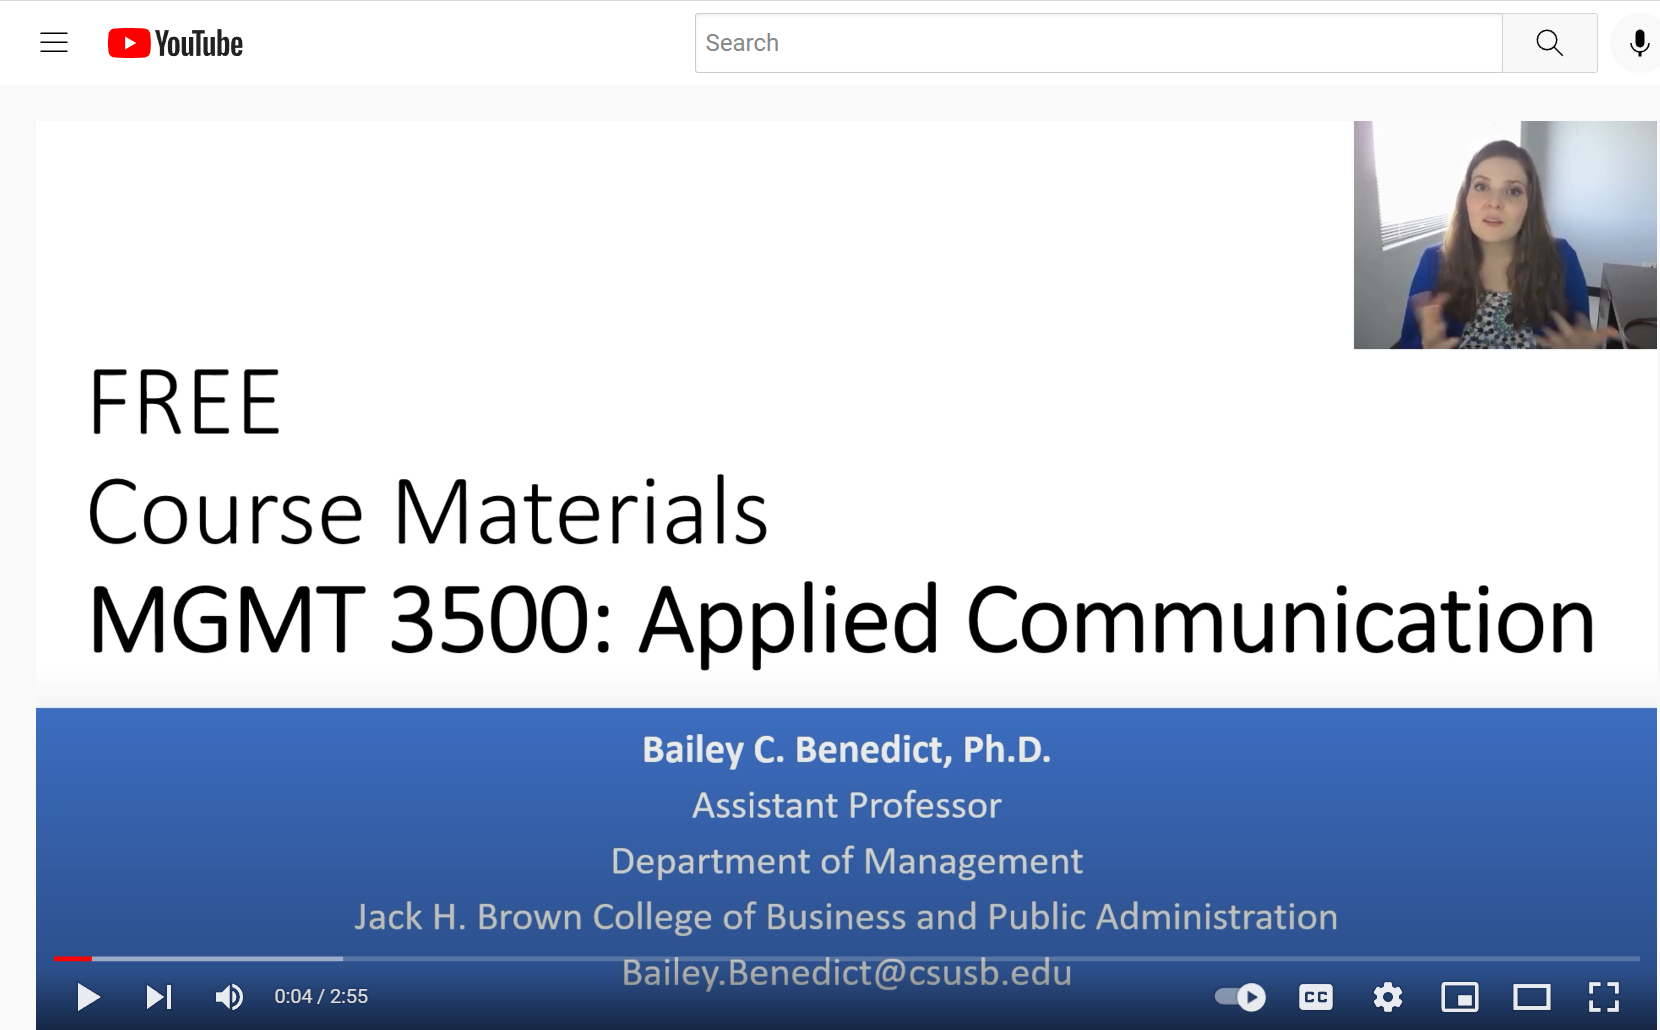 MGMT 3500: Applied Communication